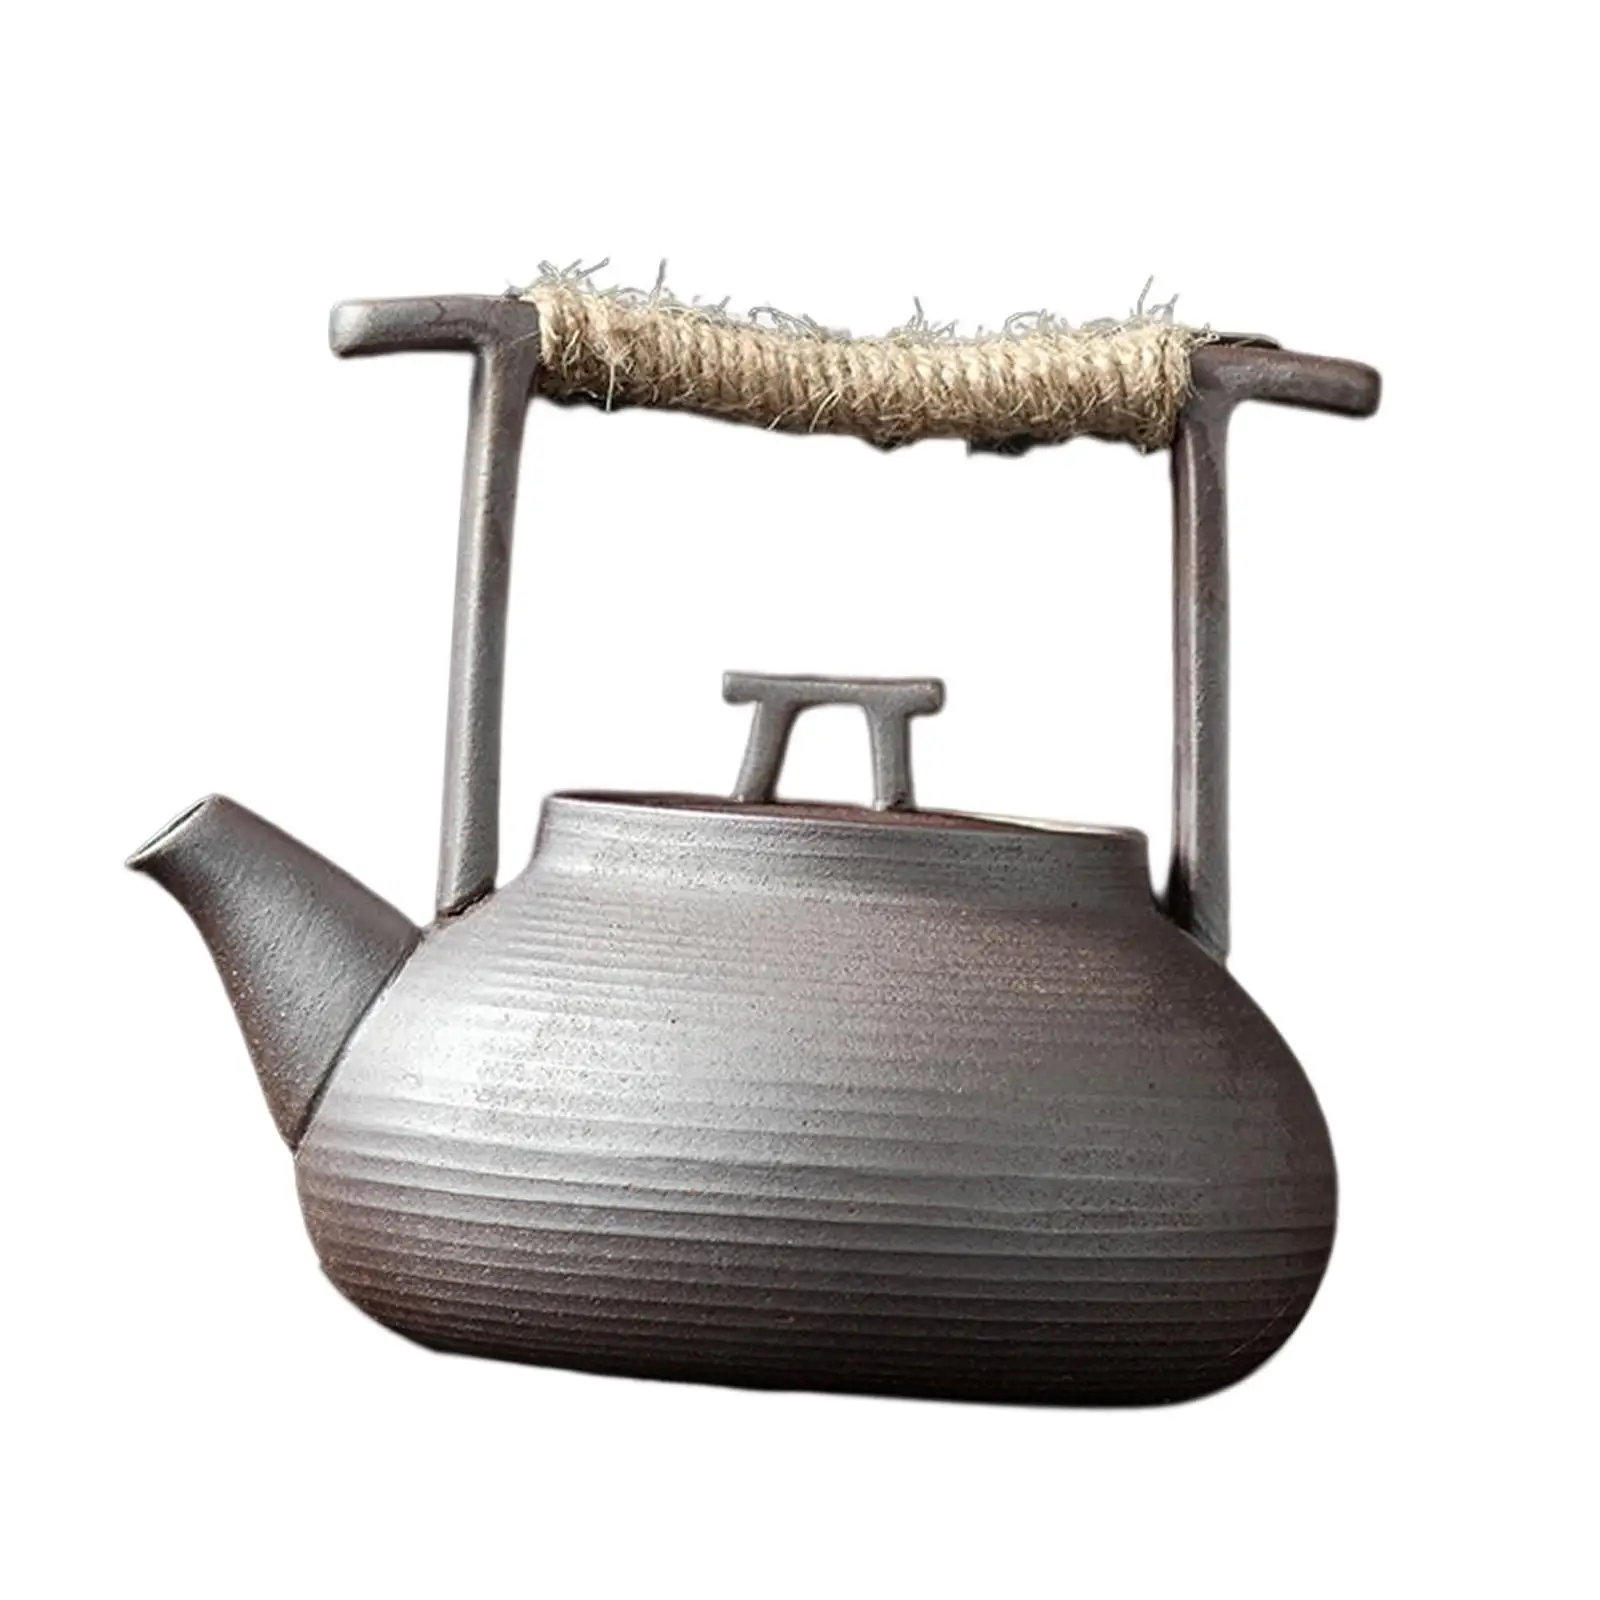 Japanese Teakettle Teapot Water Pot Handmade Teapot Warmer Portable Pot for Dining Room Camping Home Teahouse Picnic